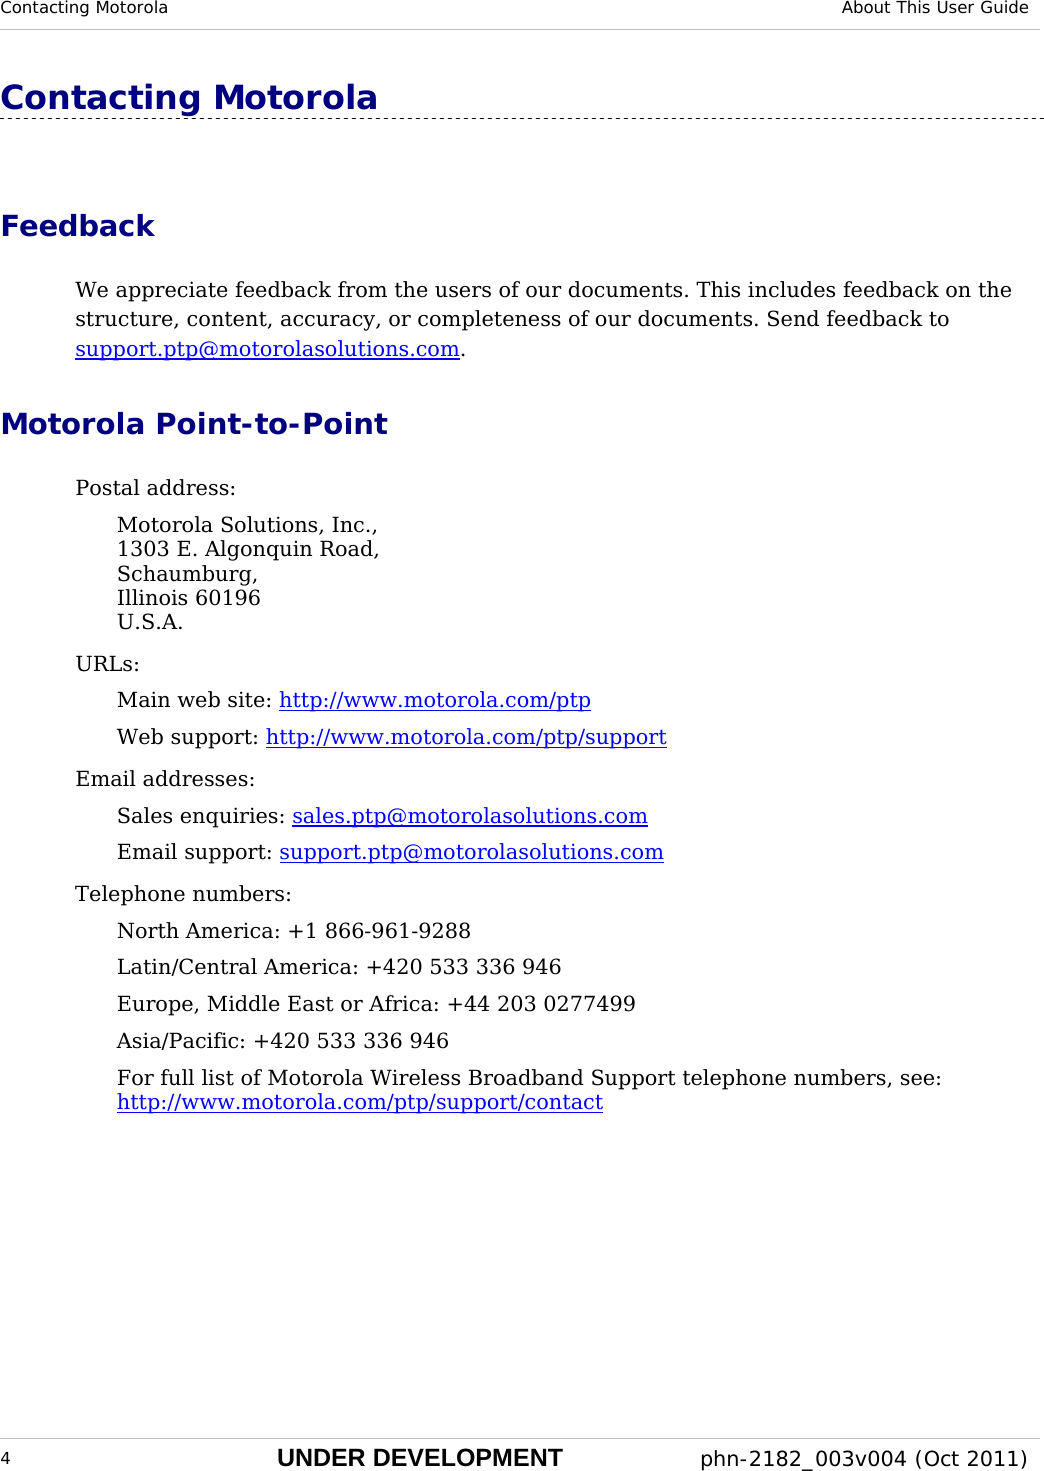 Contacting Motorola  About This User Guide  4 UNDER DEVELOPMENT  phn-2182_003v004 (Oct 2011)  Contacting Motorola Feedback We appreciate feedback from the users of our documents. This includes feedback on the structure, content, accuracy, or completeness of our documents. Send feedback to support.ptp@motorolasolutions.com. Motorola Point-to-Point Postal address: Motorola Solutions, Inc., 1303 E. Algonquin Road, Schaumburg, Illinois 60196 U.S.A. URLs: Main web site: http://www.motorola.com/ptp Web support: http://www.motorola.com/ptp/support Email addresses: Sales enquiries: sales.ptp@motorolasolutions.com Email support: support.ptp@motorolasolutions.com Telephone numbers: North America: +1 866-961-9288 Latin/Central America: +420 533 336 946 Europe, Middle East or Africa: +44 203 0277499 Asia/Pacific: +420 533 336 946 For full list of Motorola Wireless Broadband Support telephone numbers, see: http://www.motorola.com/ptp/support/contact  